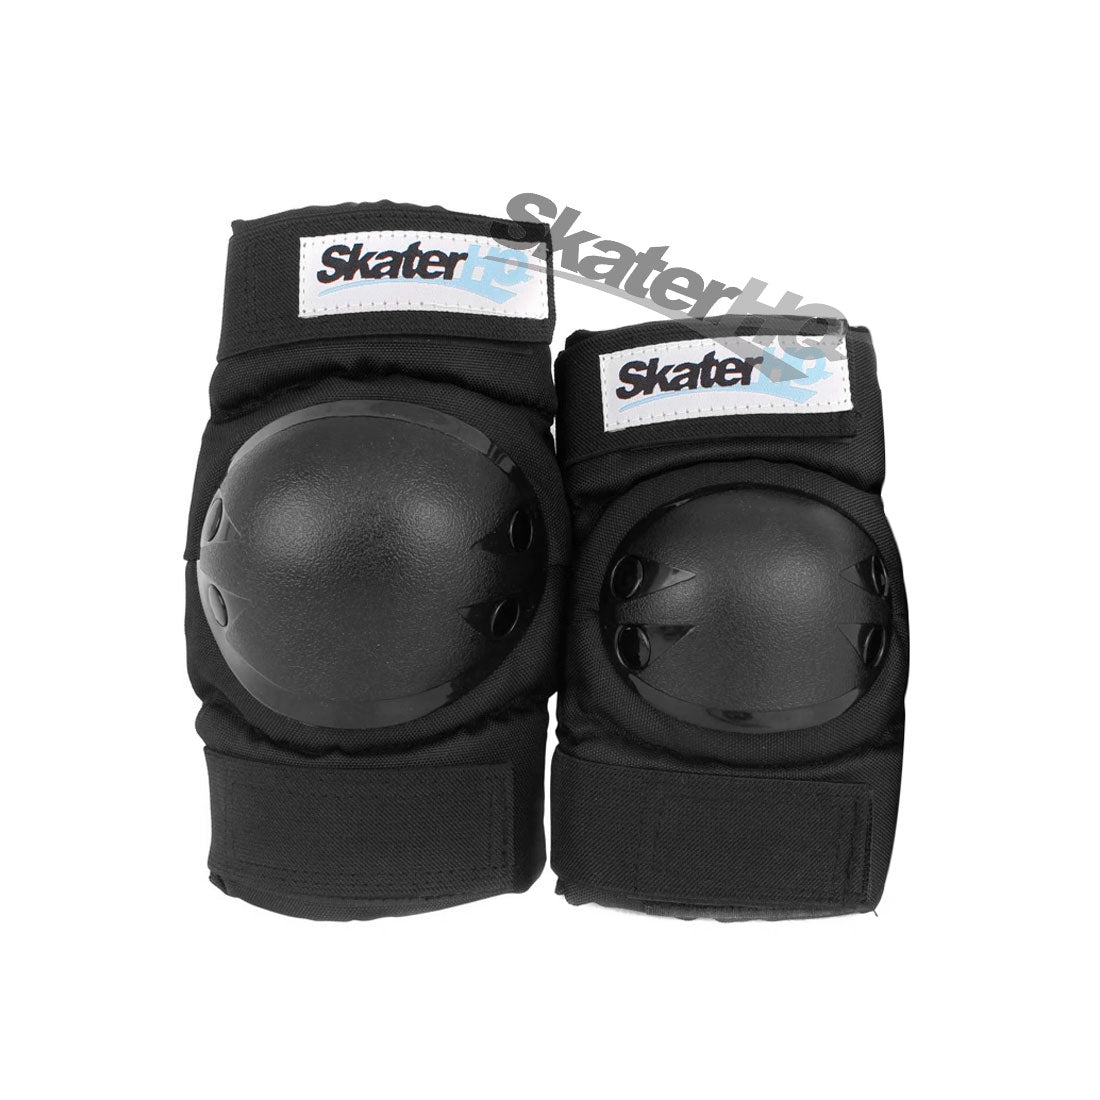 Skater HQ Knee/Elbow Set - Small Protective Gear